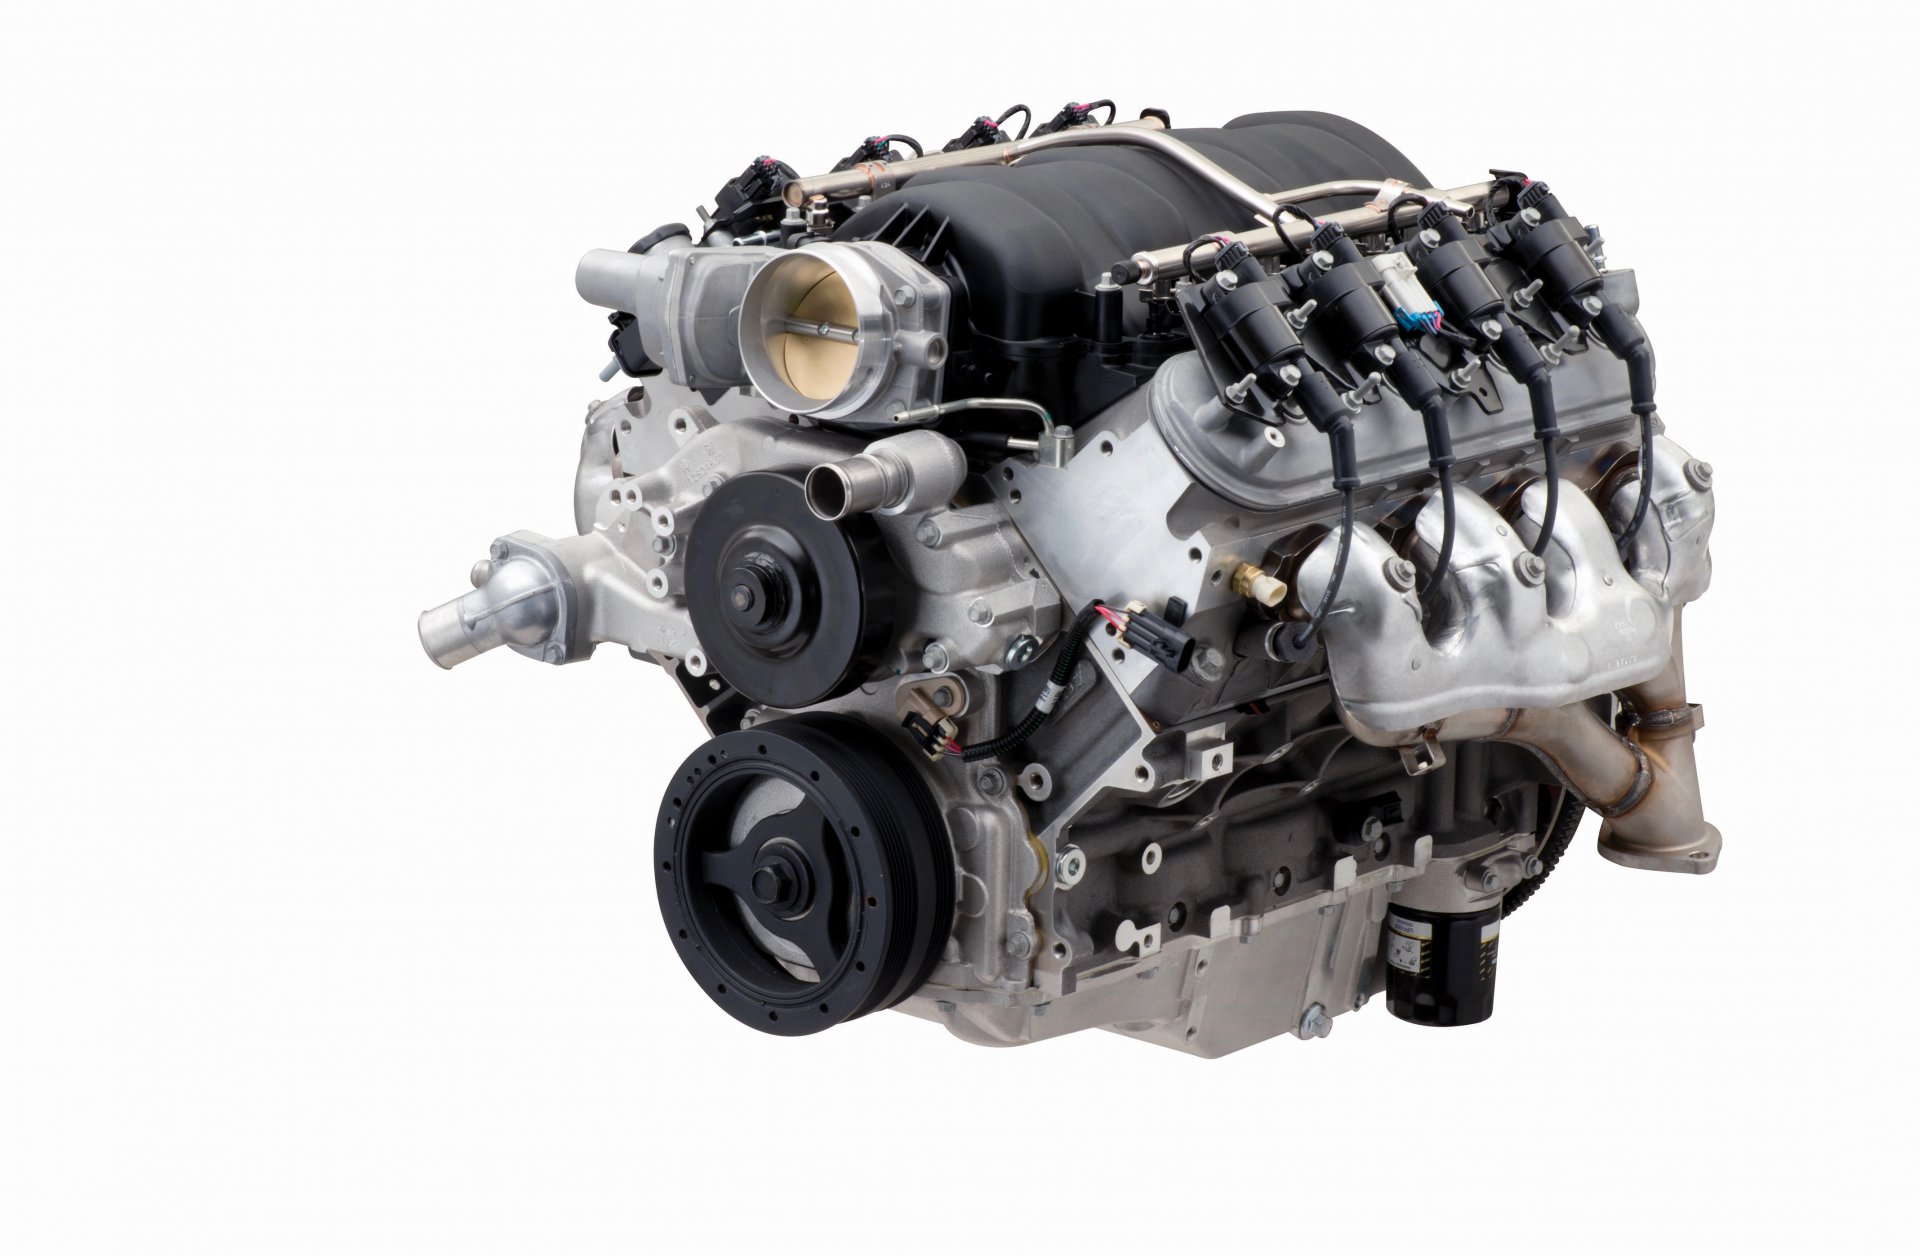 Chevy offers LS427/570 crate engine to aftermarket